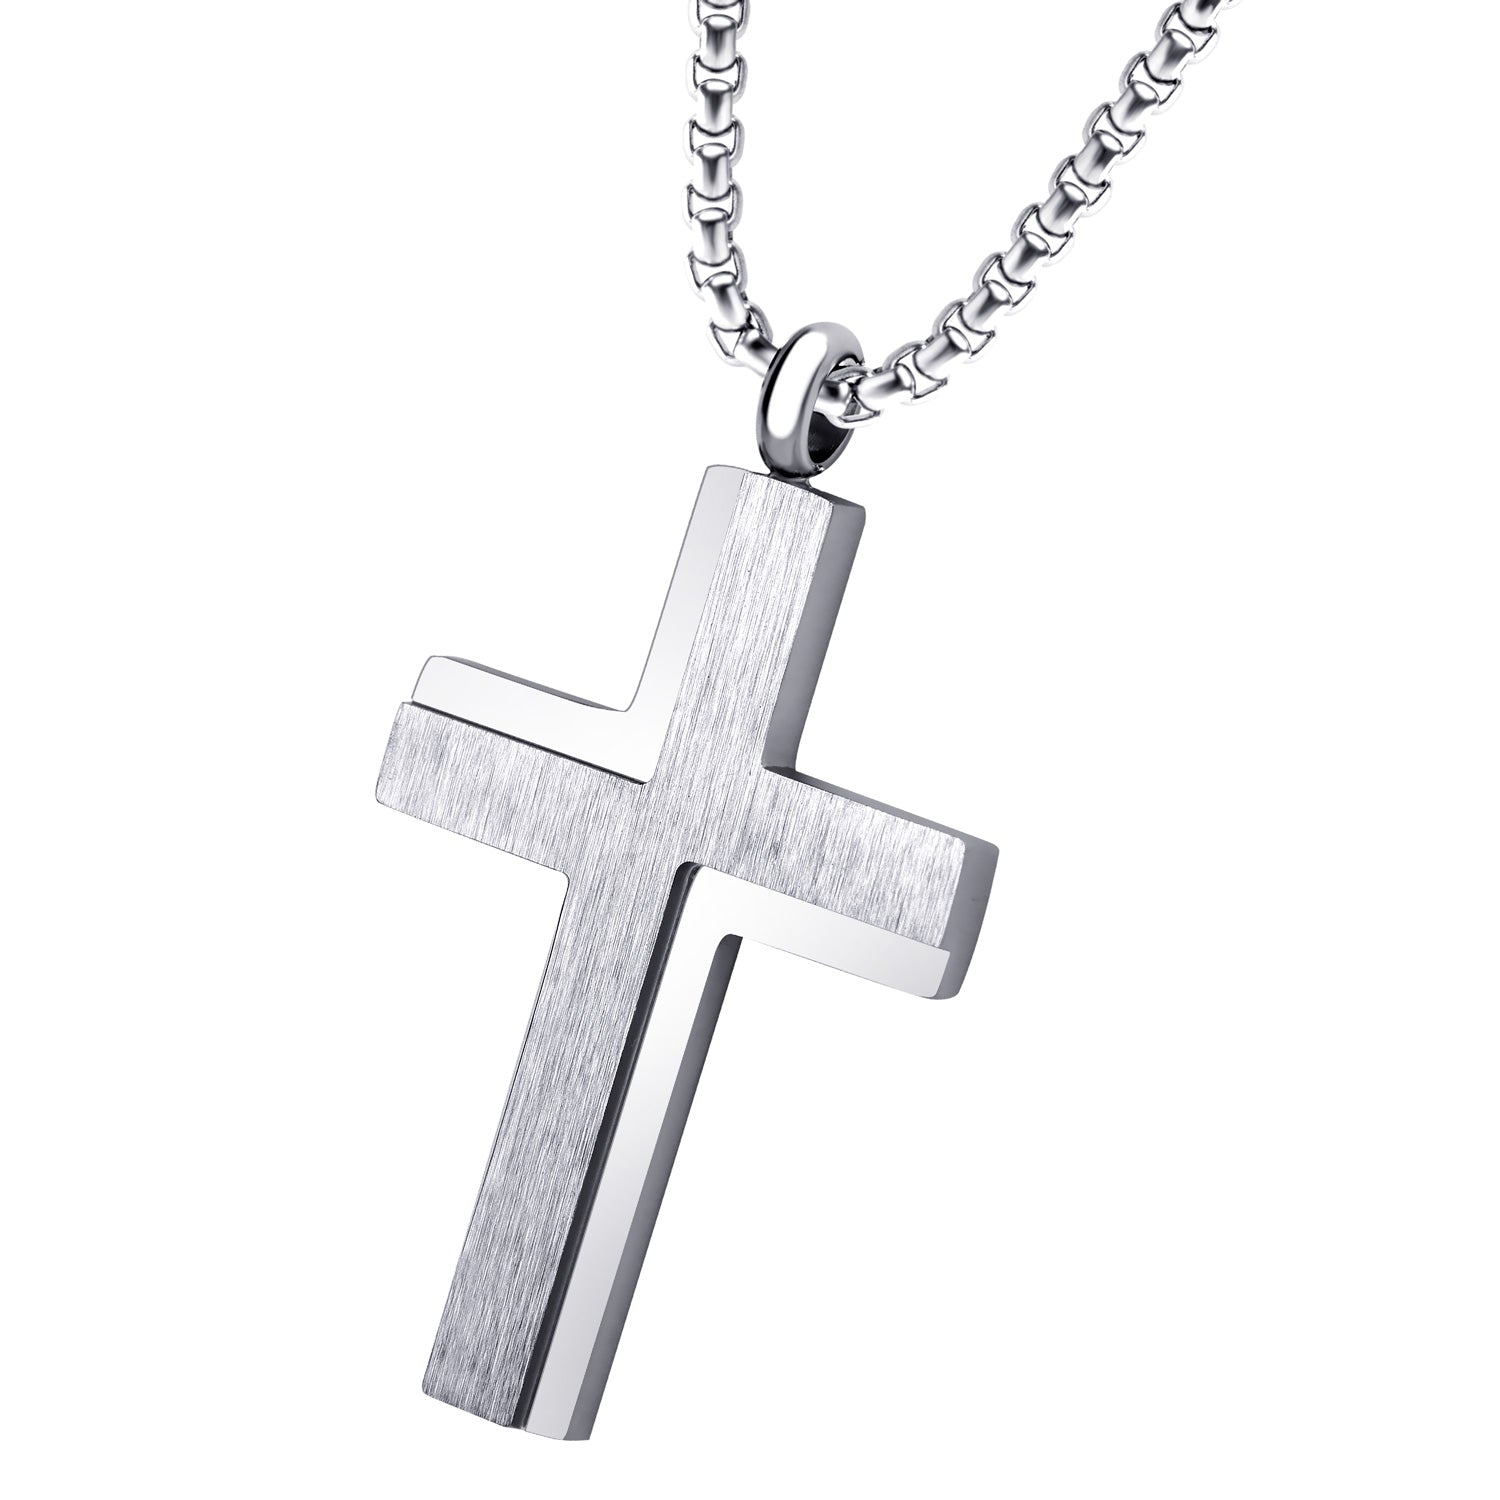 Silver Cross on Chain Necklace for Boys or Men | Jewels 4 Girls